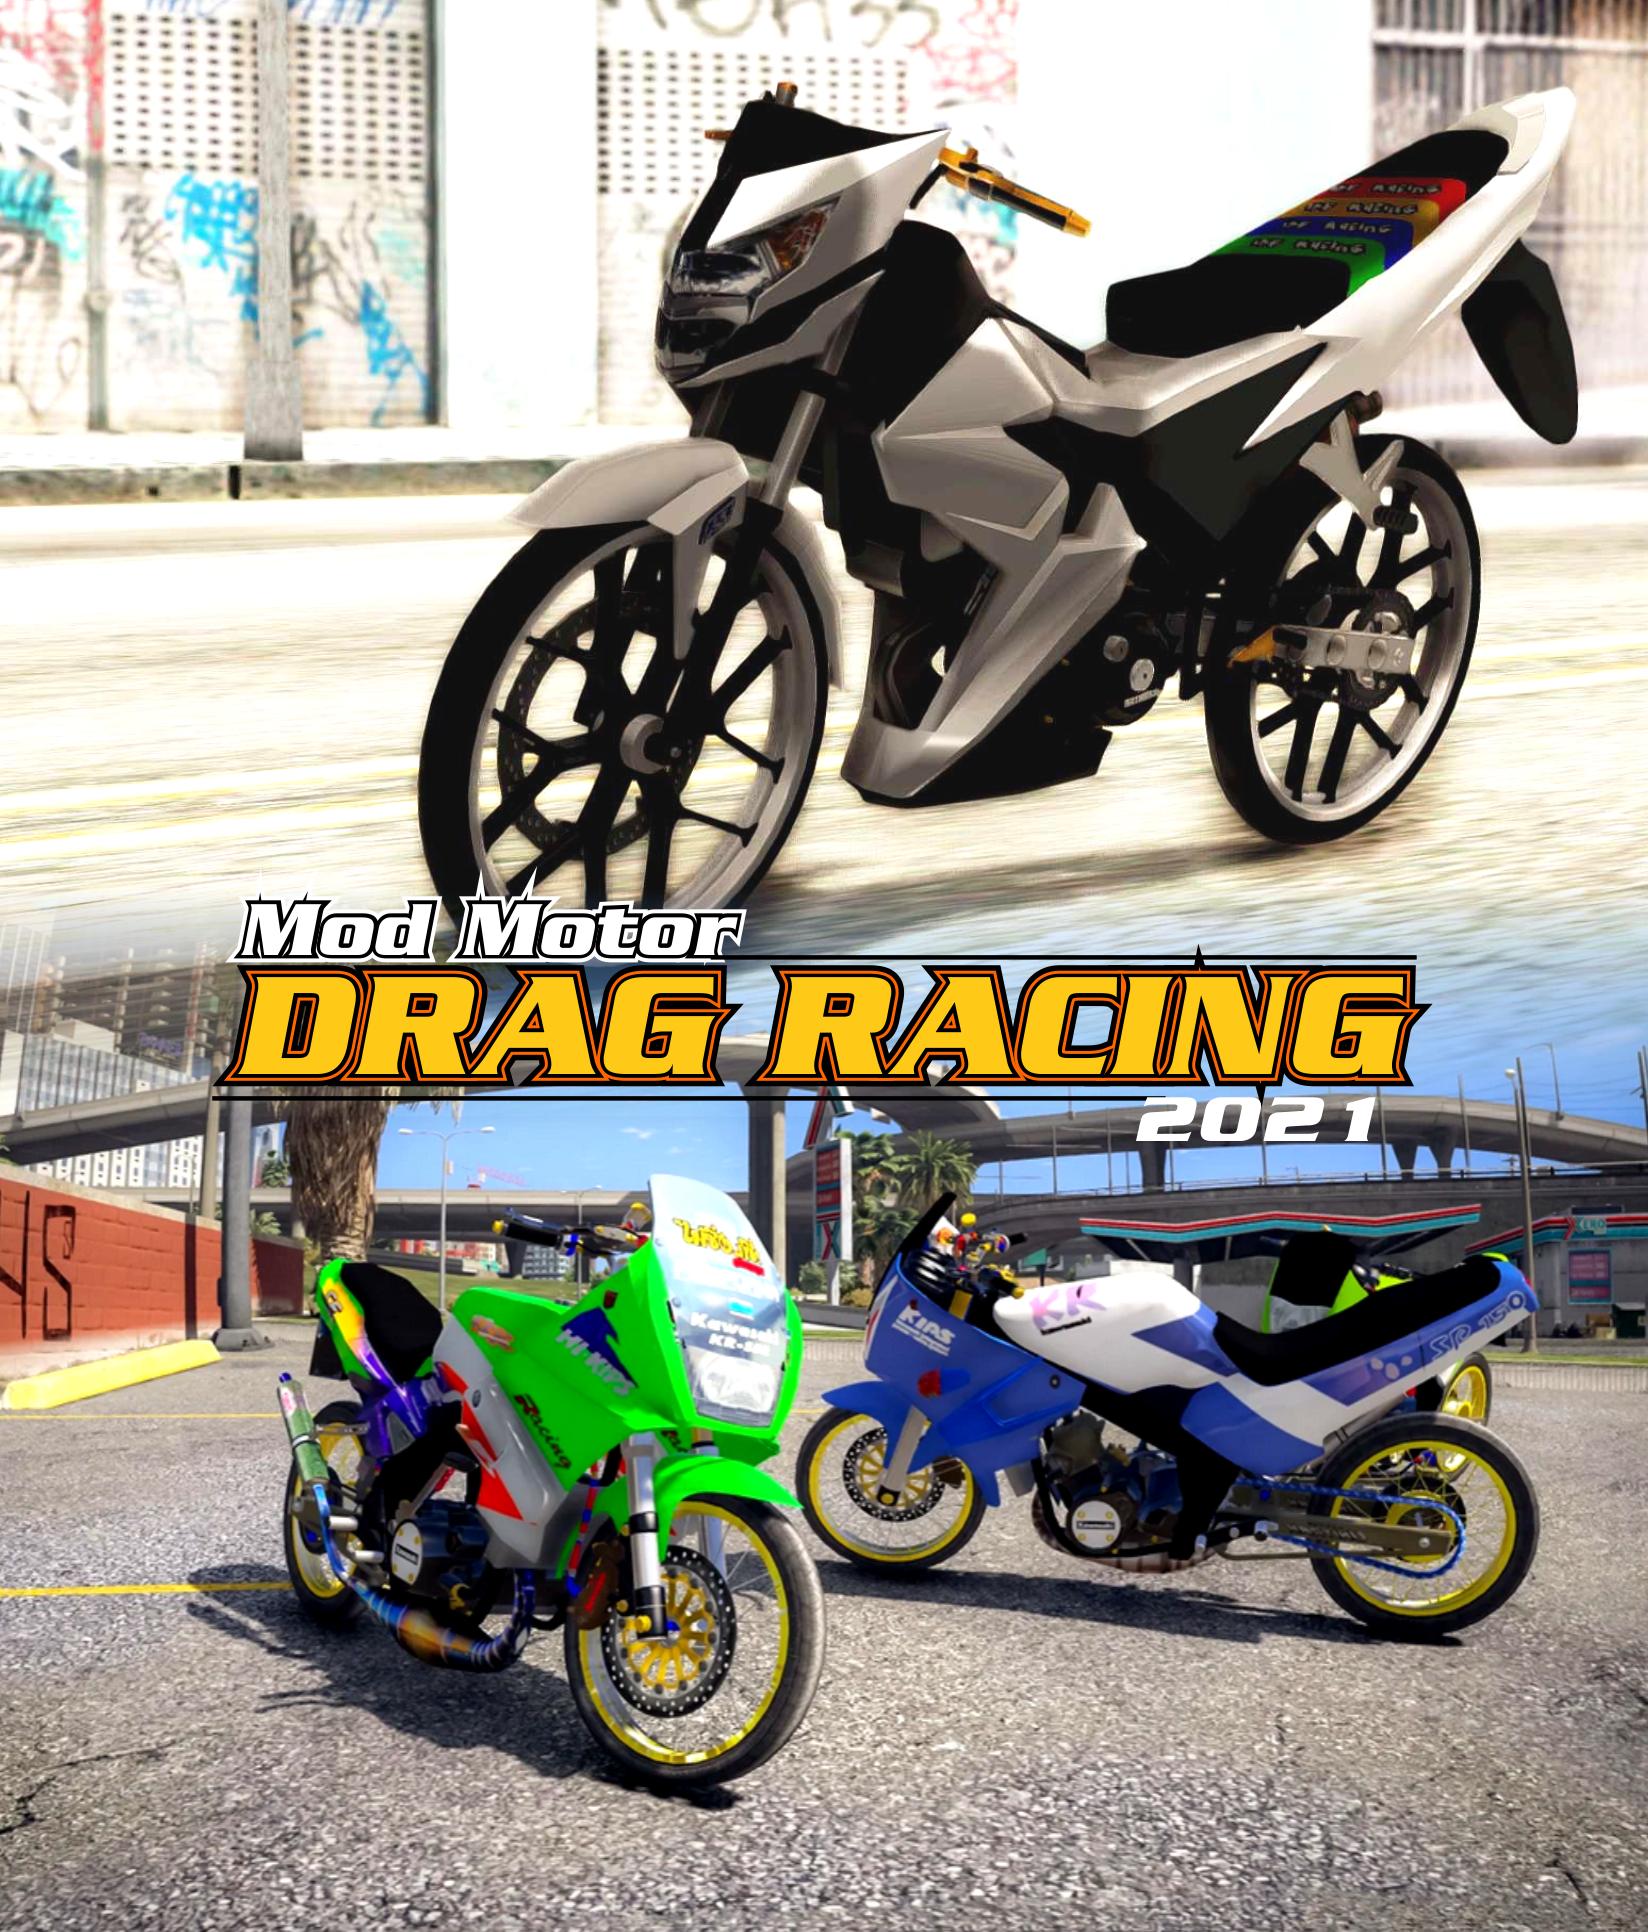 Mod Motor Drag Racing 2021 For Android APK Download